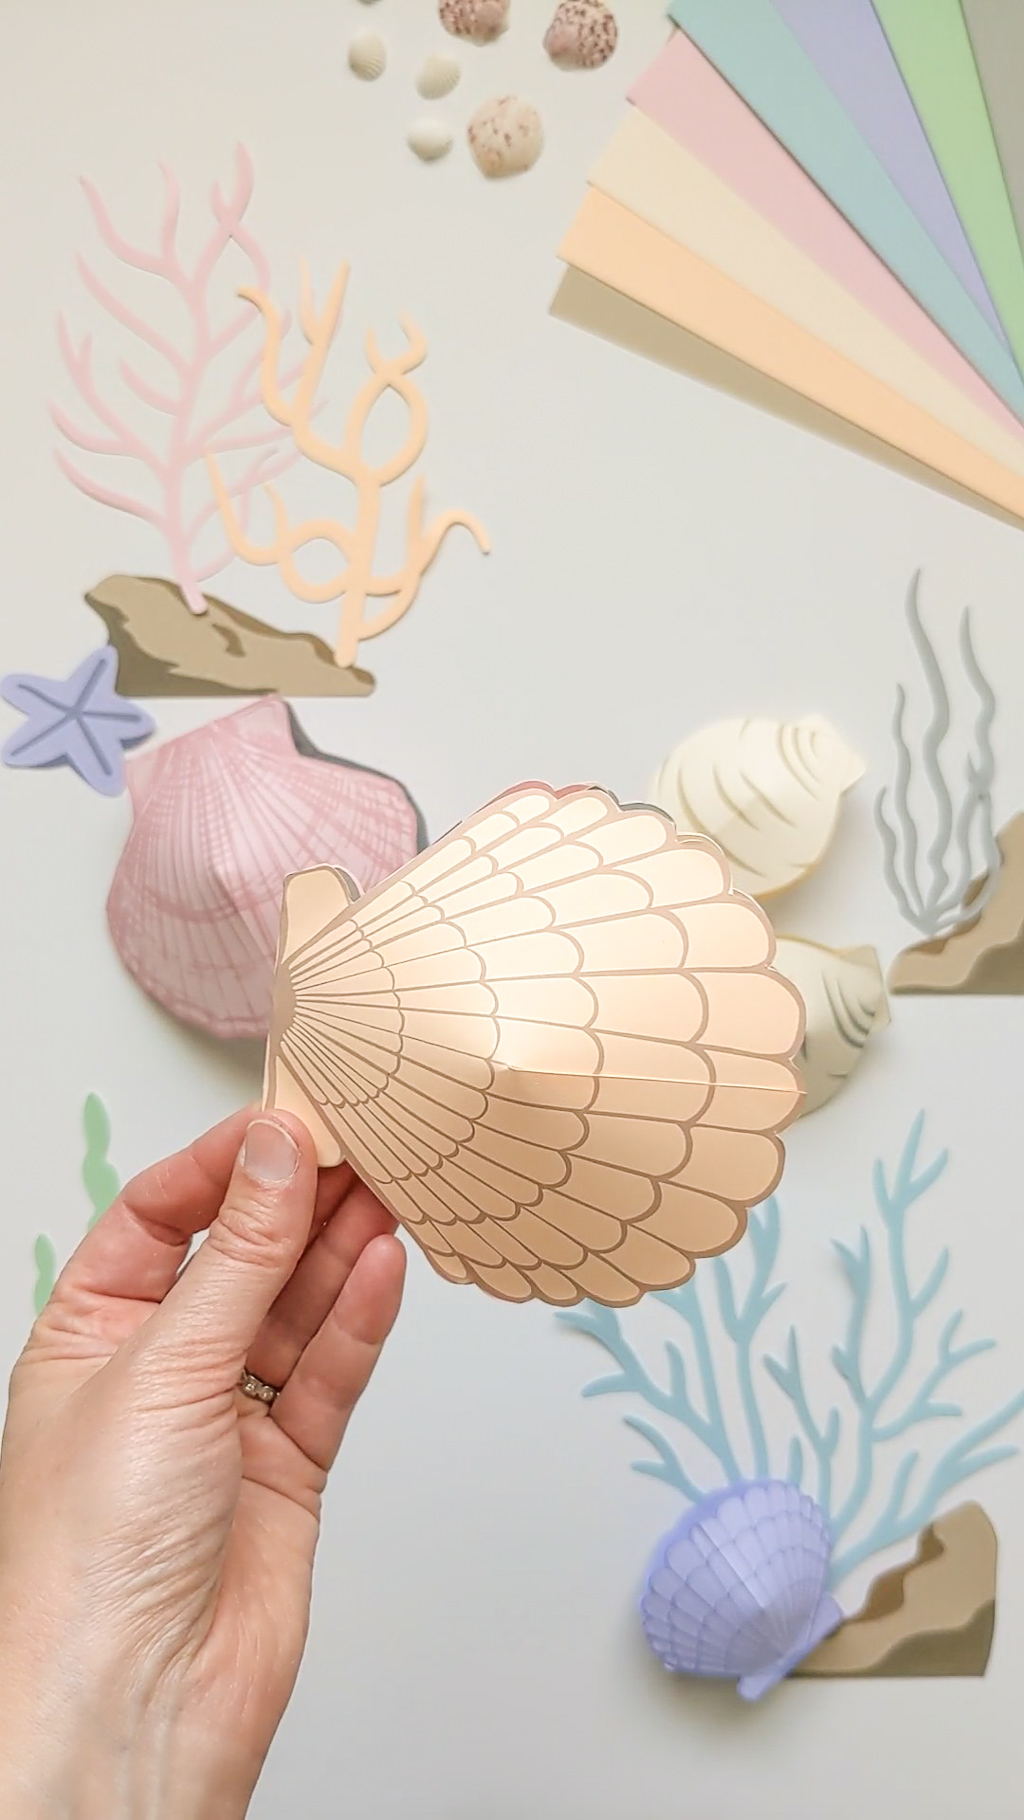 3D paper seashell craft and free printable template